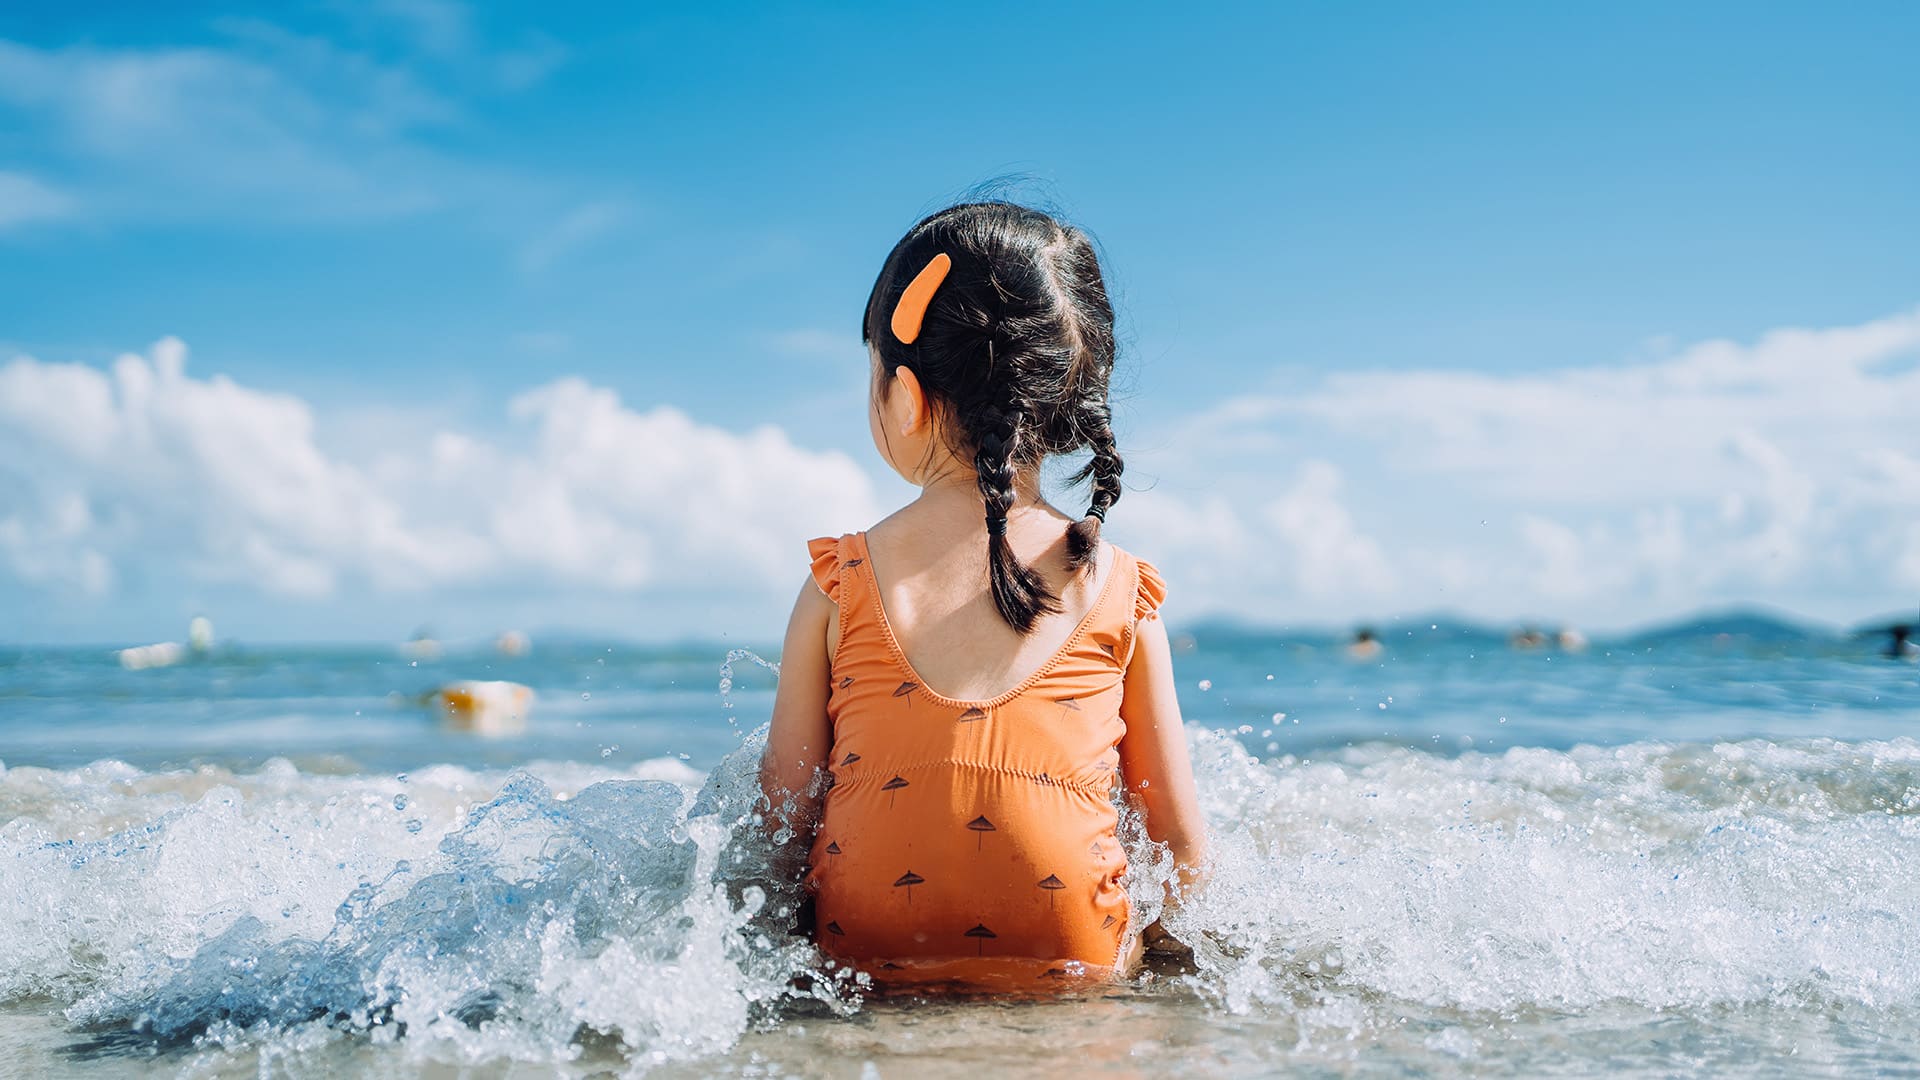 Toddler in orange bathing suit sitting on the beach in the waves.